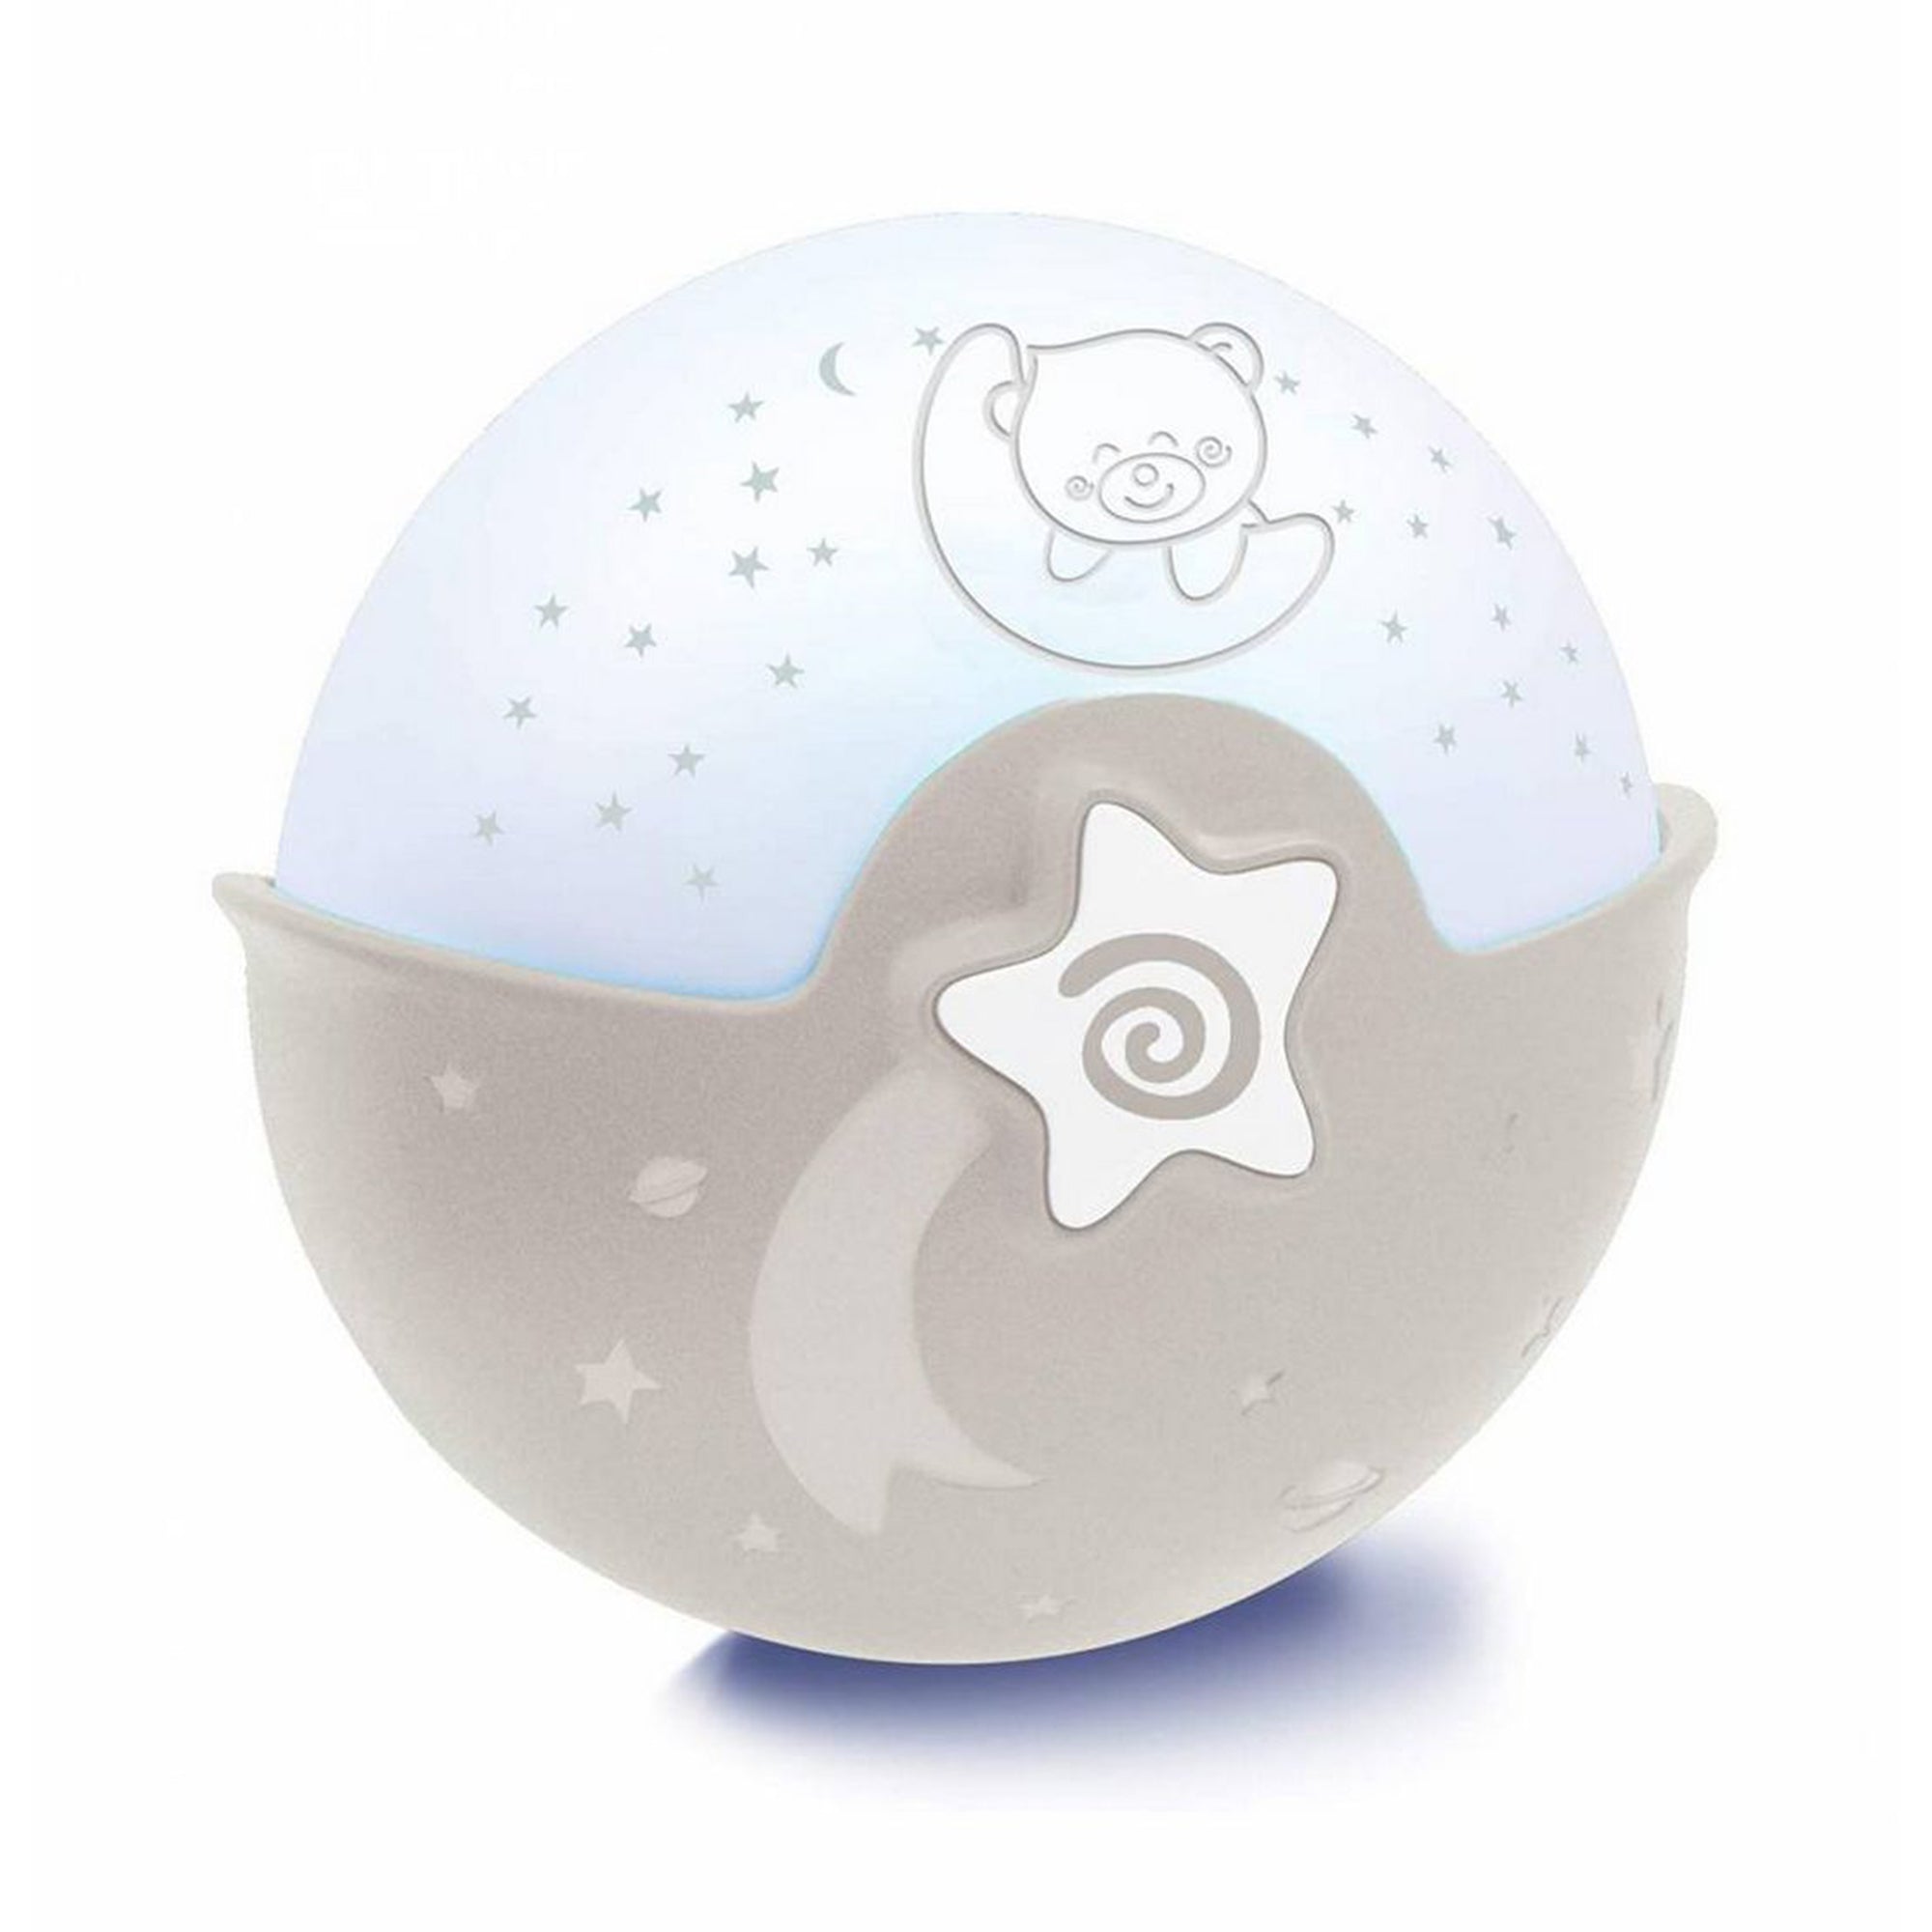 Infantino Soothing Light and Projector - Birth to 24 Months